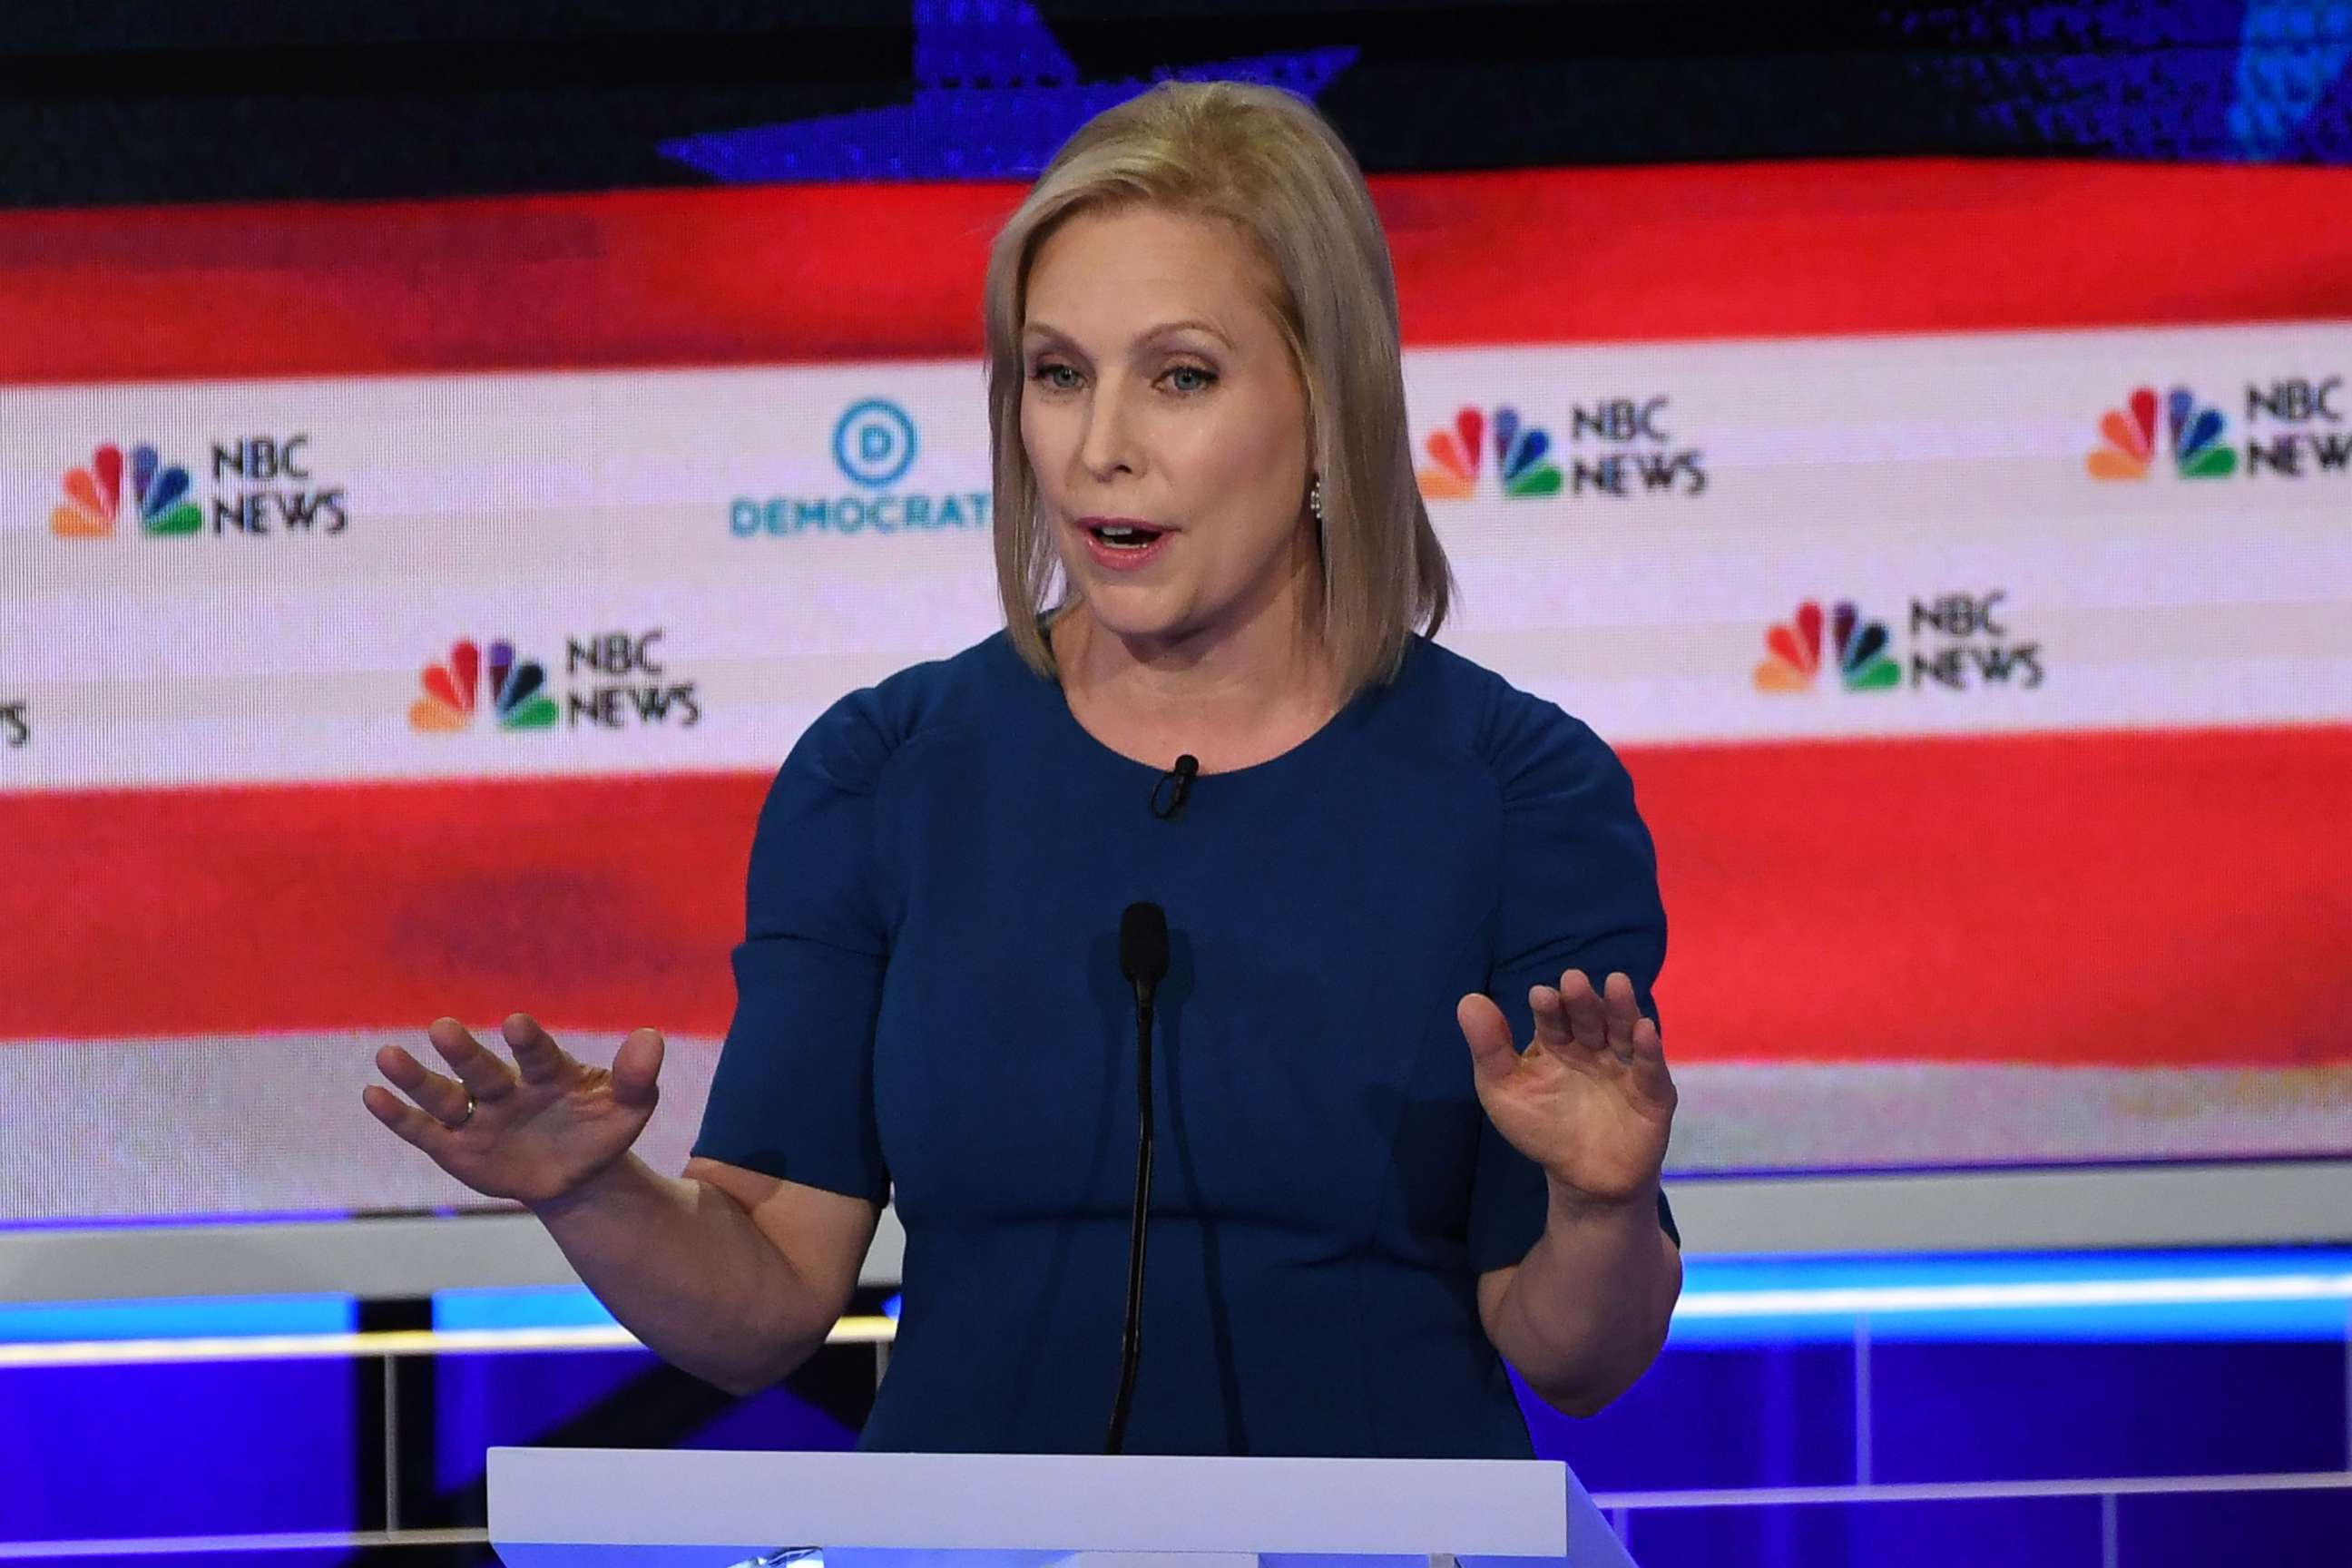 PHOTO: Kristen Gillibrand participates in the second night of the first 2020 democratic presidential debate at the Adrienne Arsht Center for the Performing Arts in Miami, June 27, 2019.